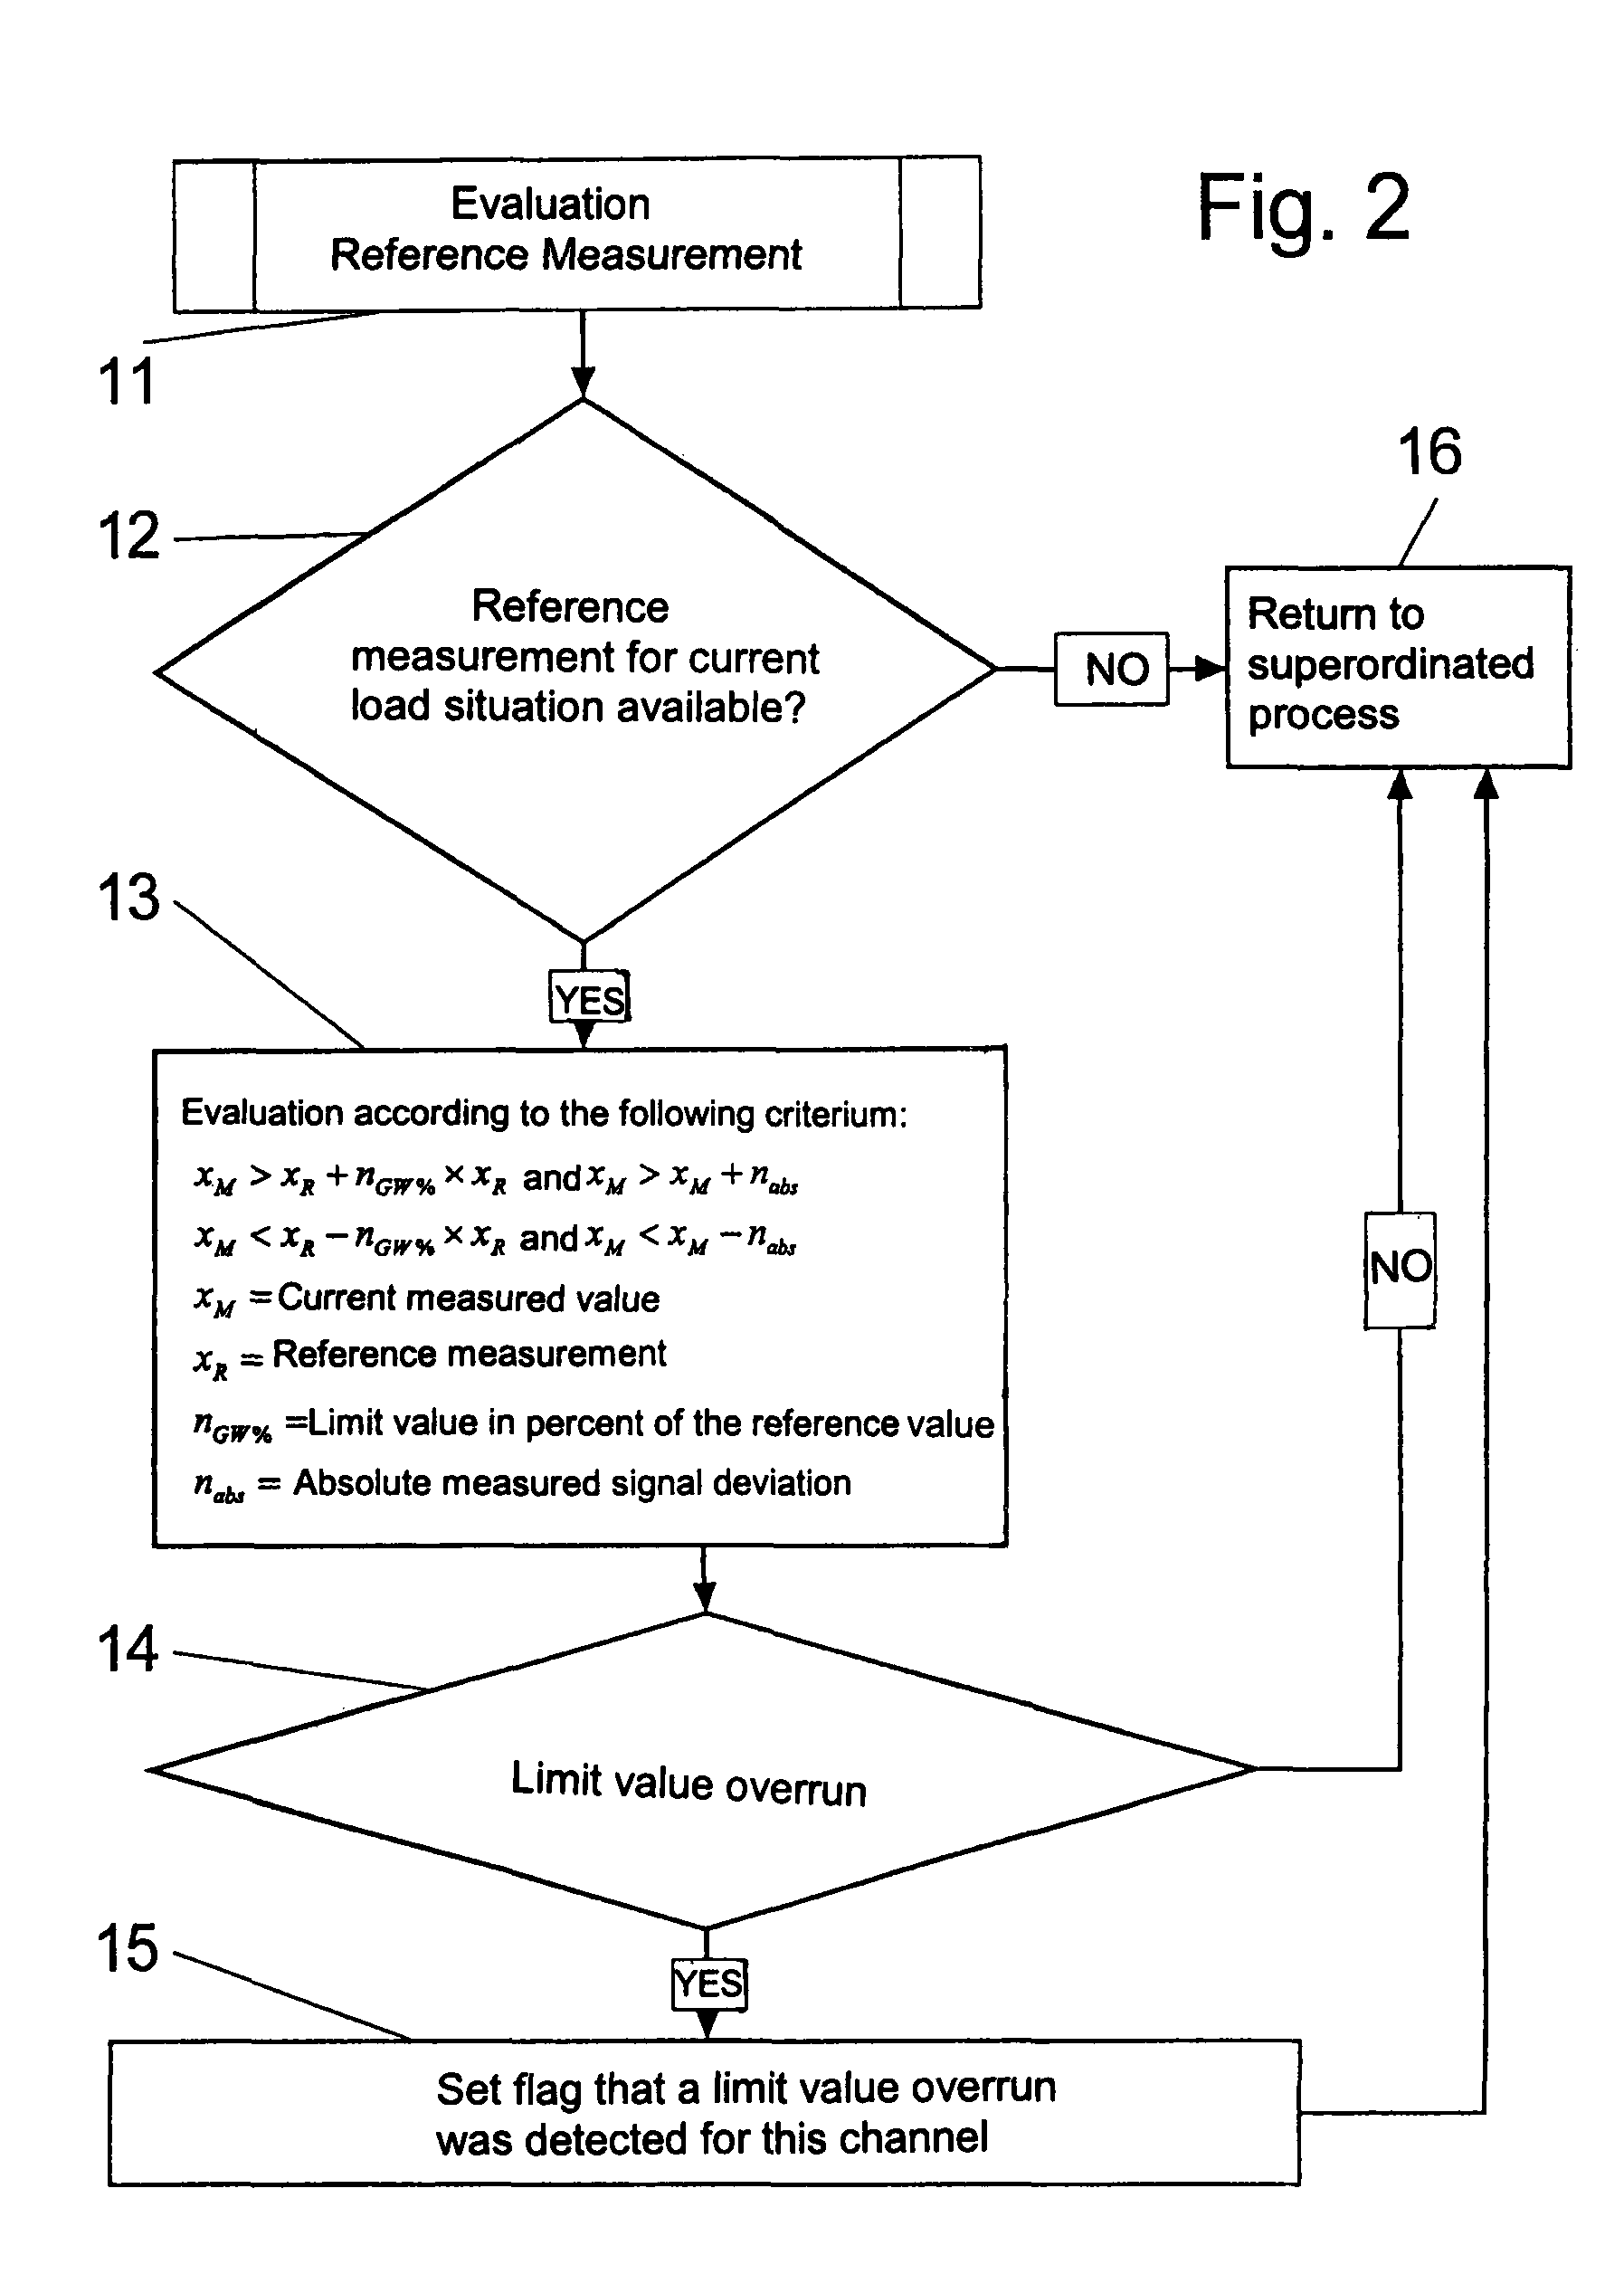 Method for evaluating measured values for identifying a material fatigue